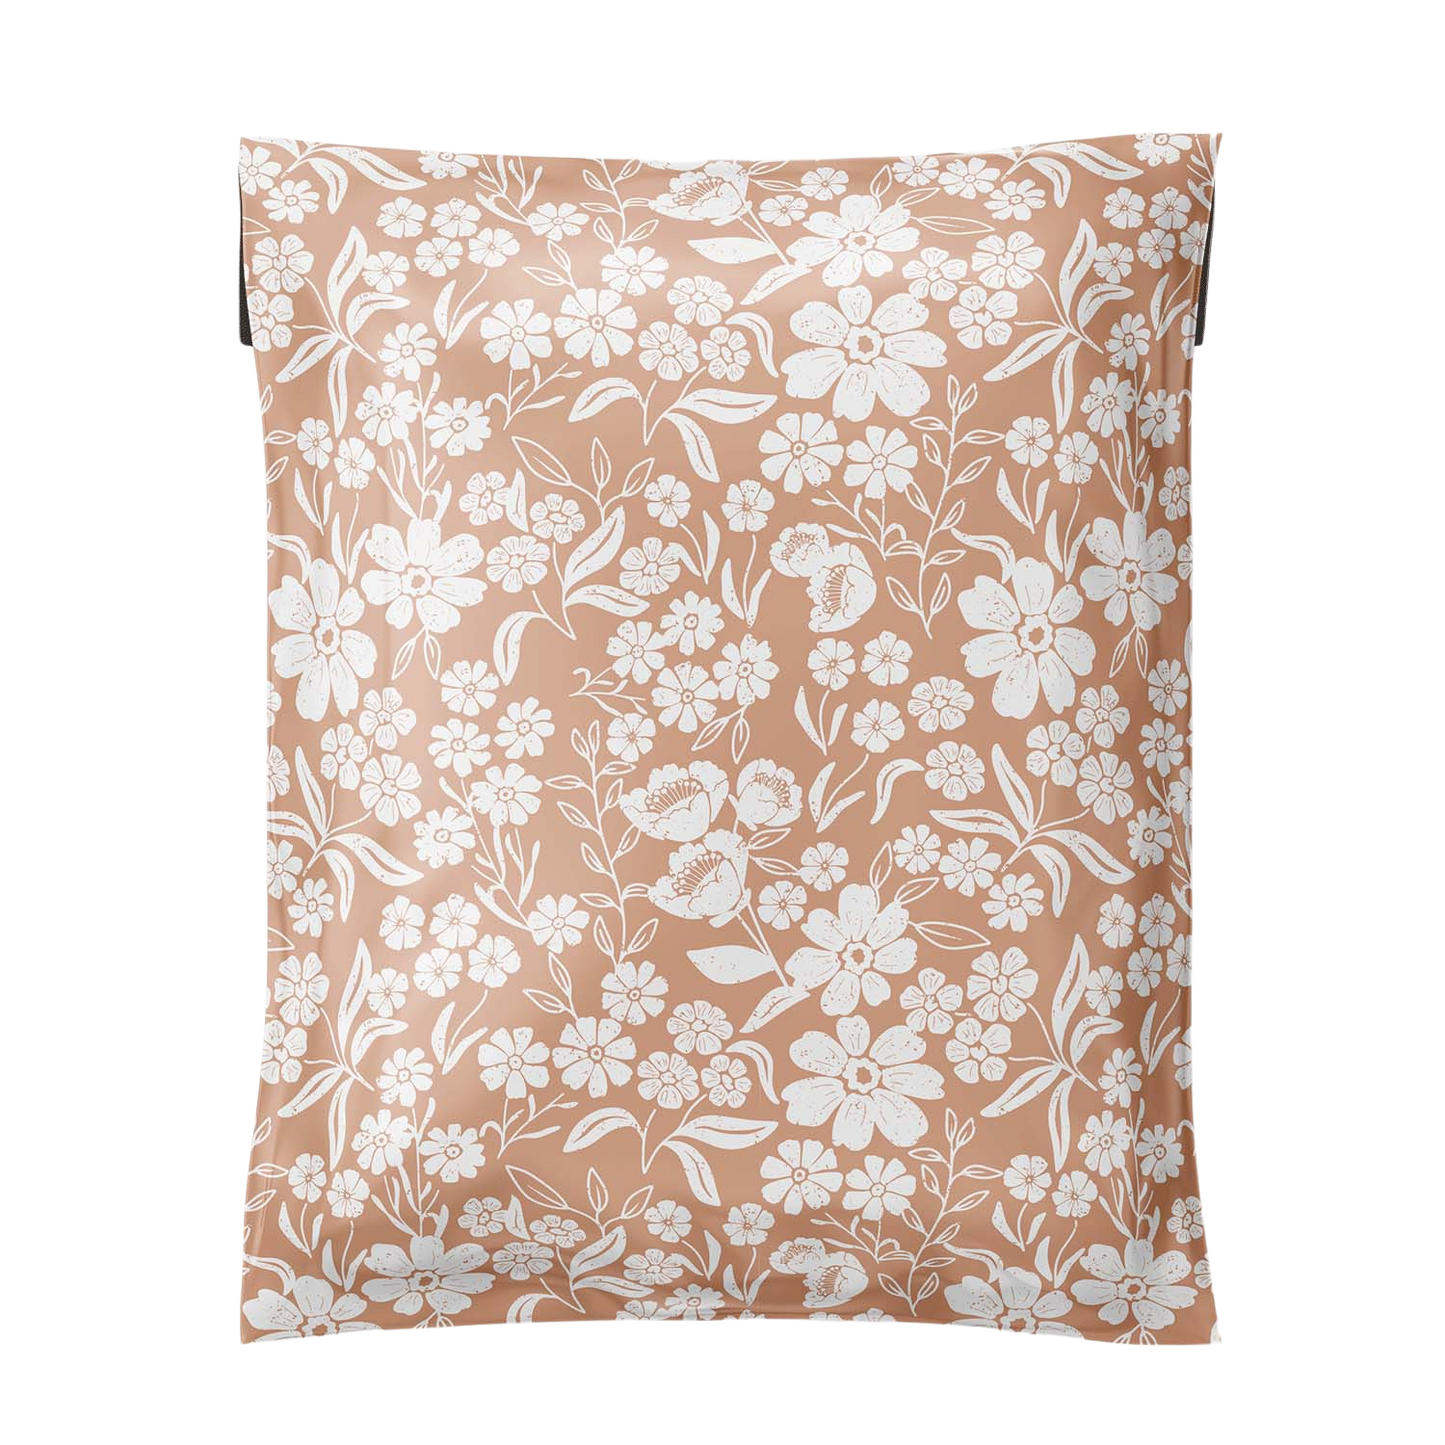 Floral Dusty Pink Poly Mailers featuring a stylish floral design pattern against a white background. From Favorite Supplies, adding a touch of elegance to your small business packaging.